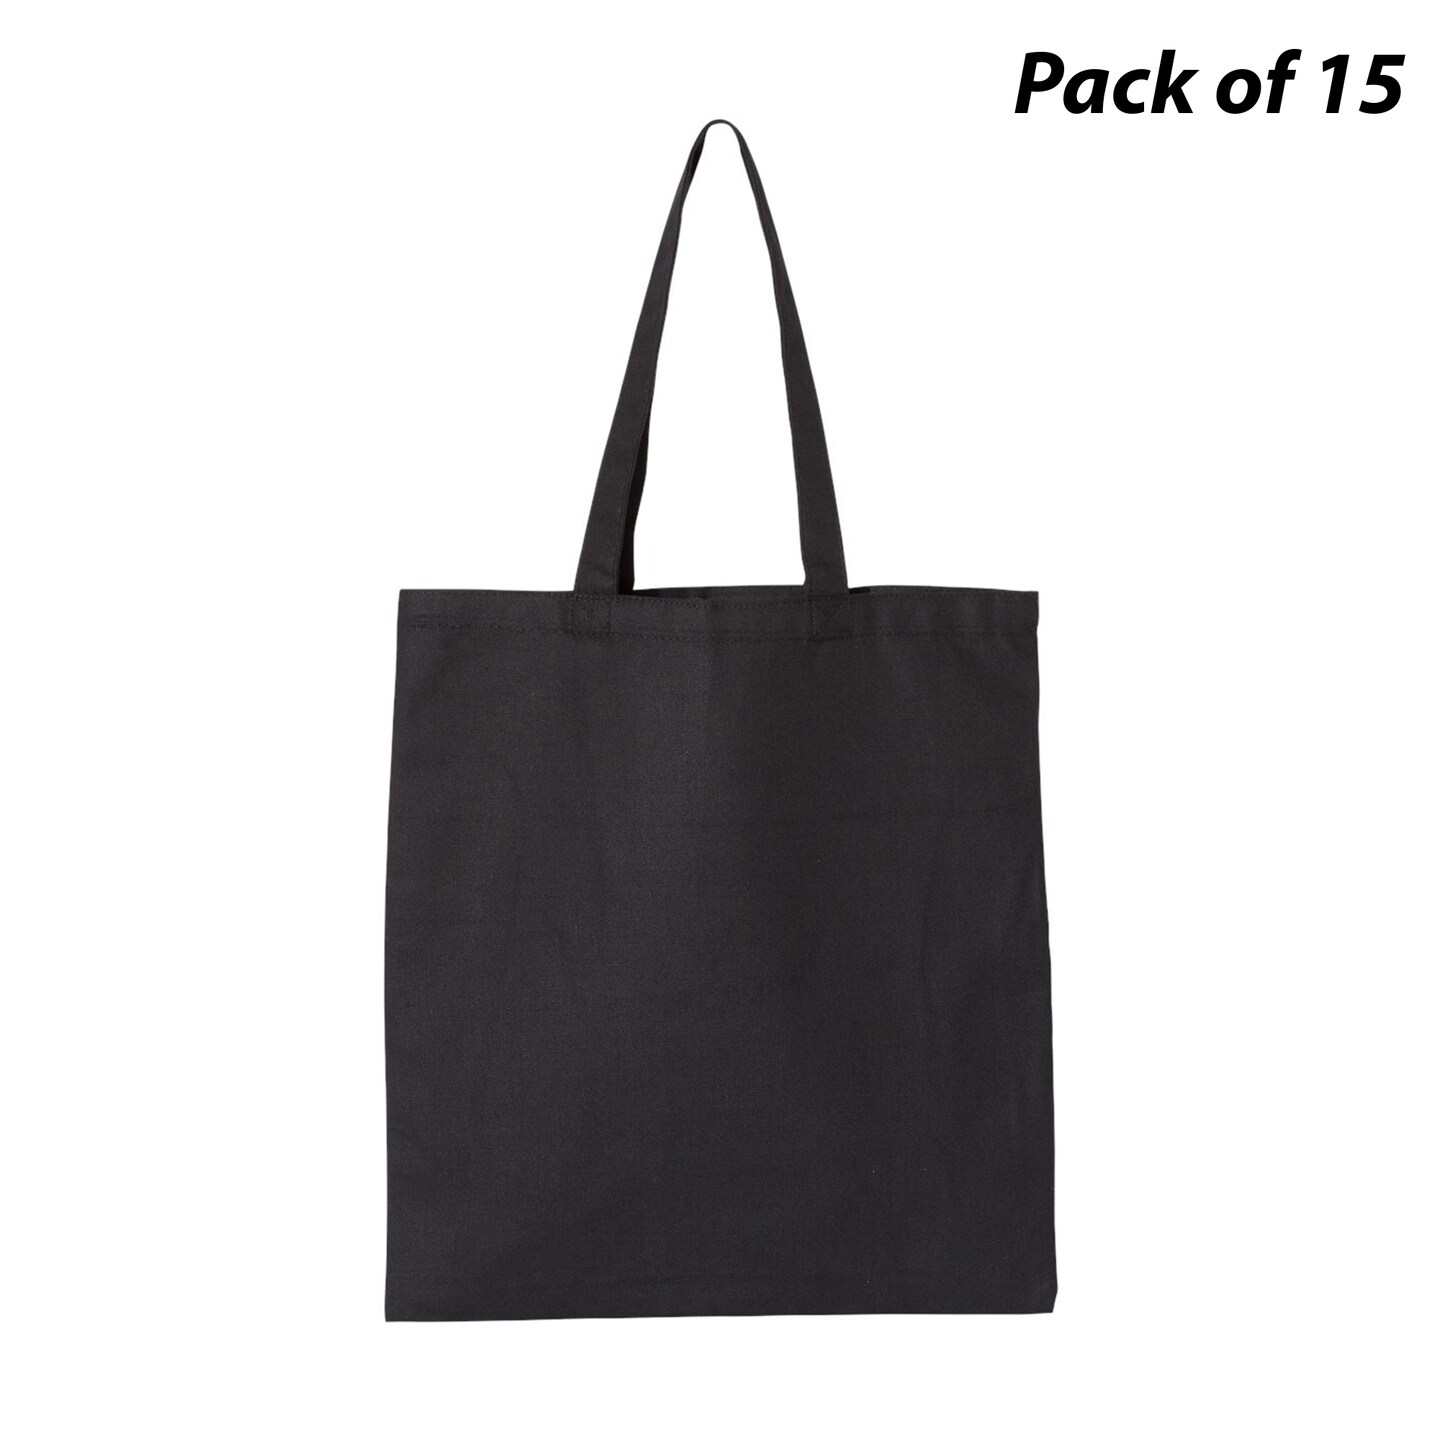 Show Some Love 2 Nature By Using Cotton Carry Bags